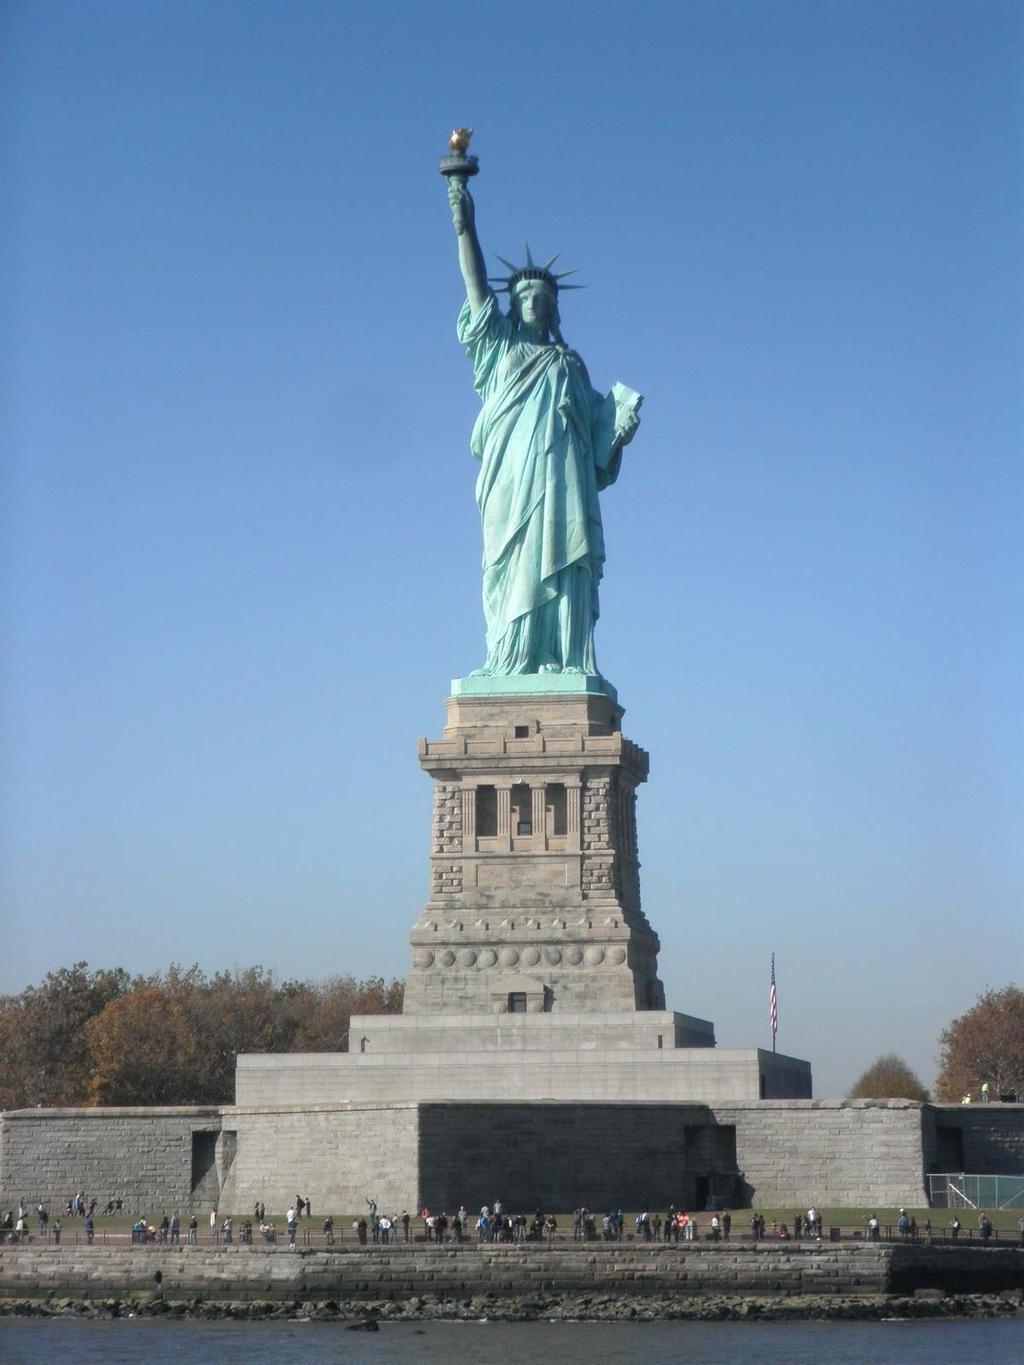 NEW YORK We go to Statue of Liberty in the